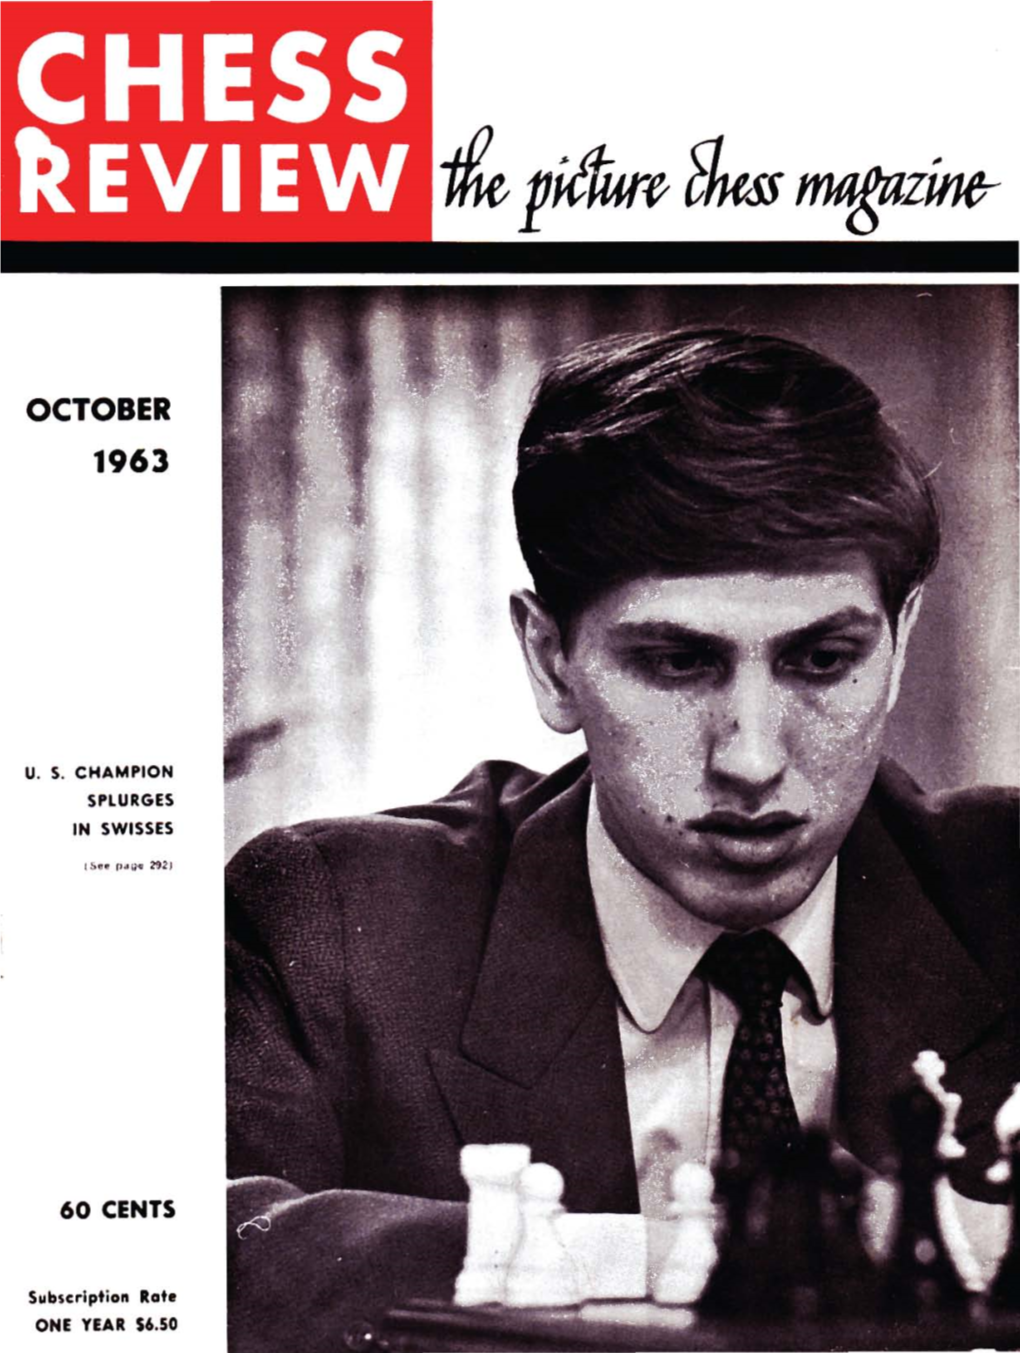 CHESS REVIEW Rhi "Au., CHI N MAO""'" Vol Un'e 31 Number 10 October 1S63 EDITED &